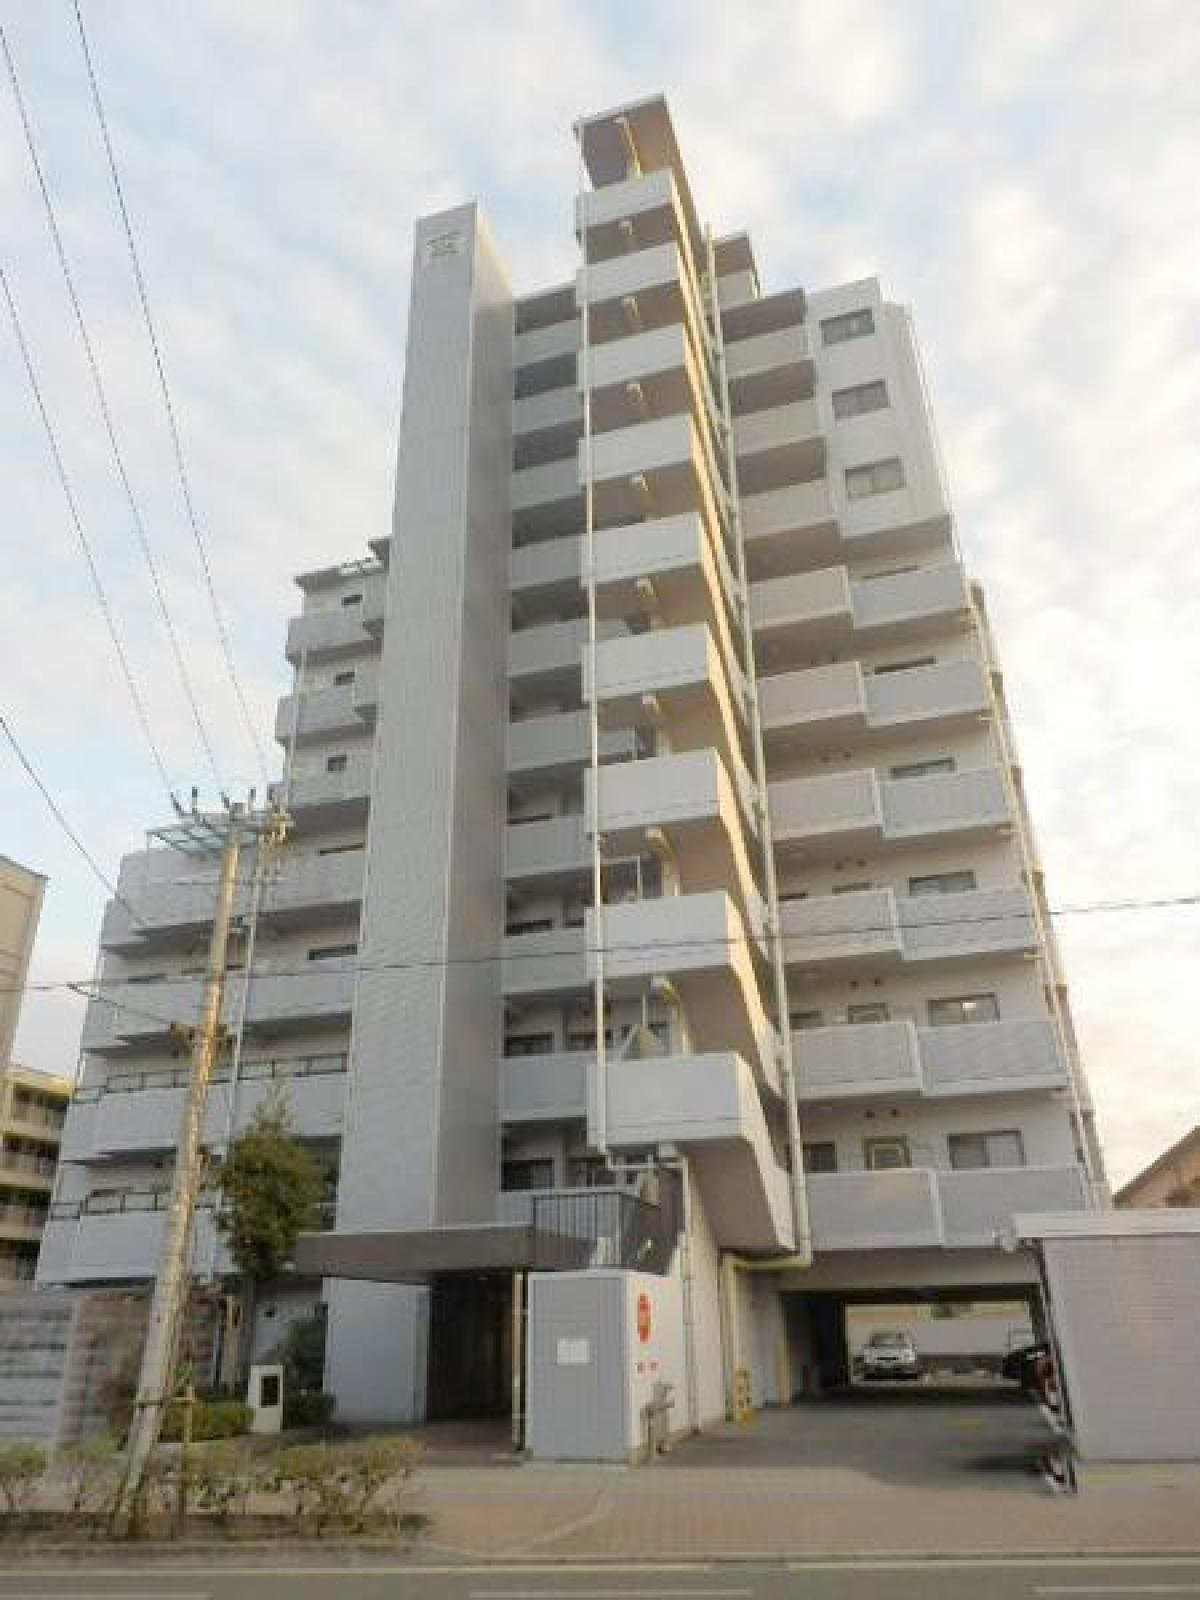 Picture of Apartment For Sale in Takatsuki Shi, Osaka, Japan